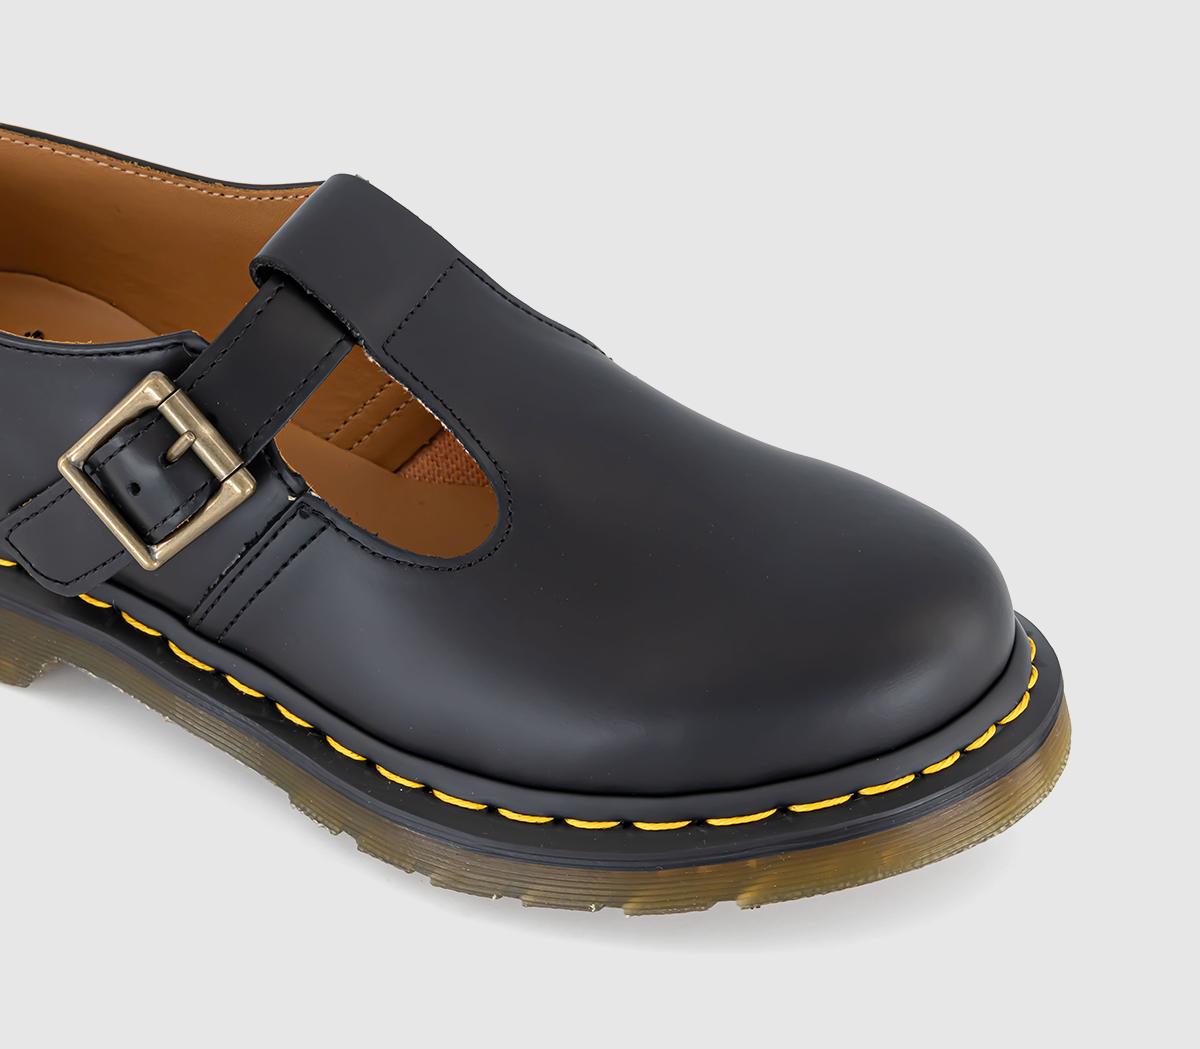 Dr. Martens Polley T Bar Shoes Black - Flat Shoes for Women